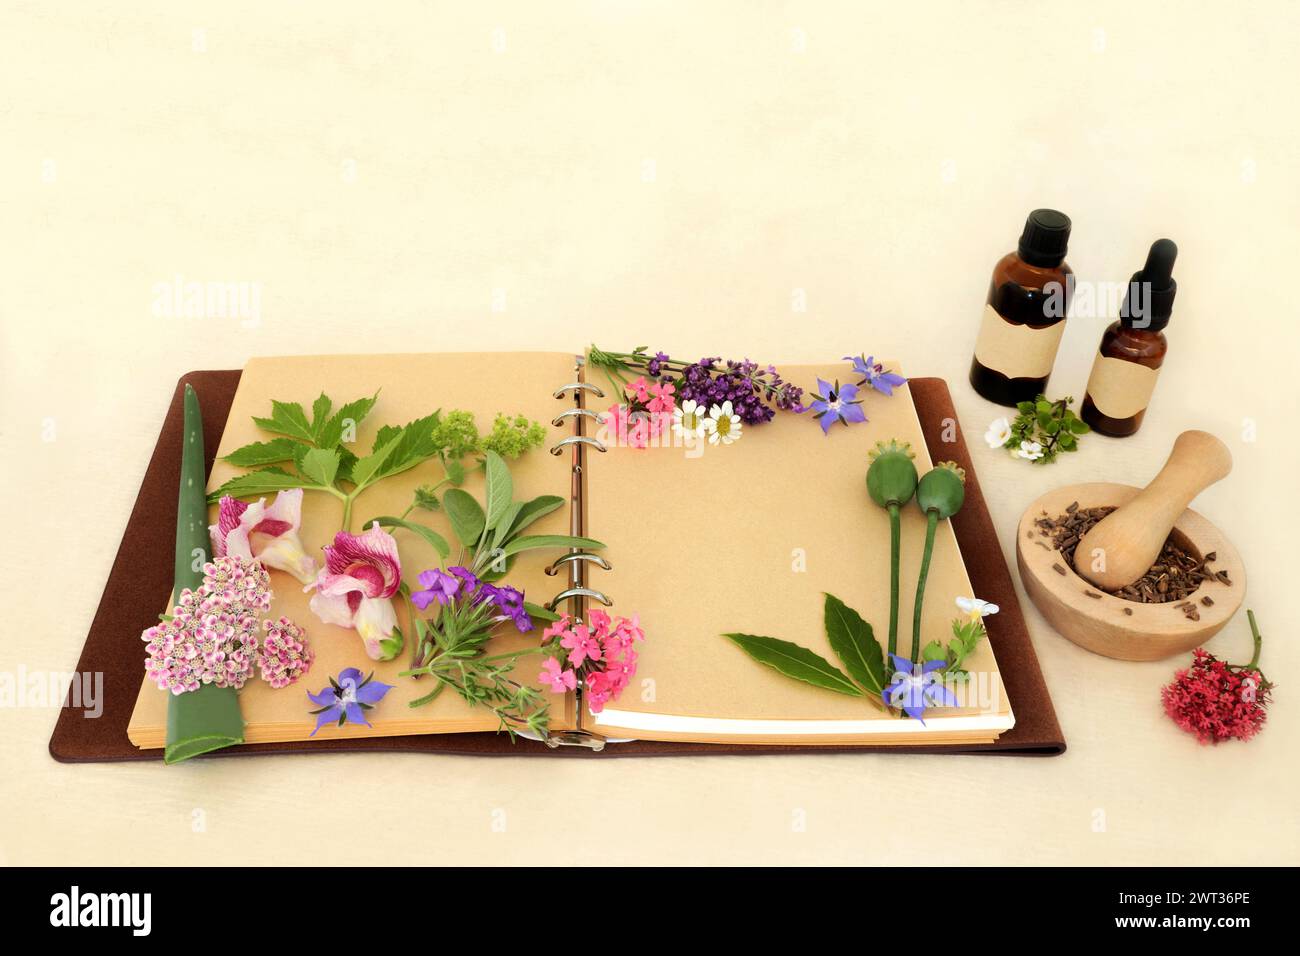 Preparing aromatherapy essential oil with flowers, herbs, wildflowers used in natural herbal medicine remedies with tincture bottles, recipe notebook Stock Photo